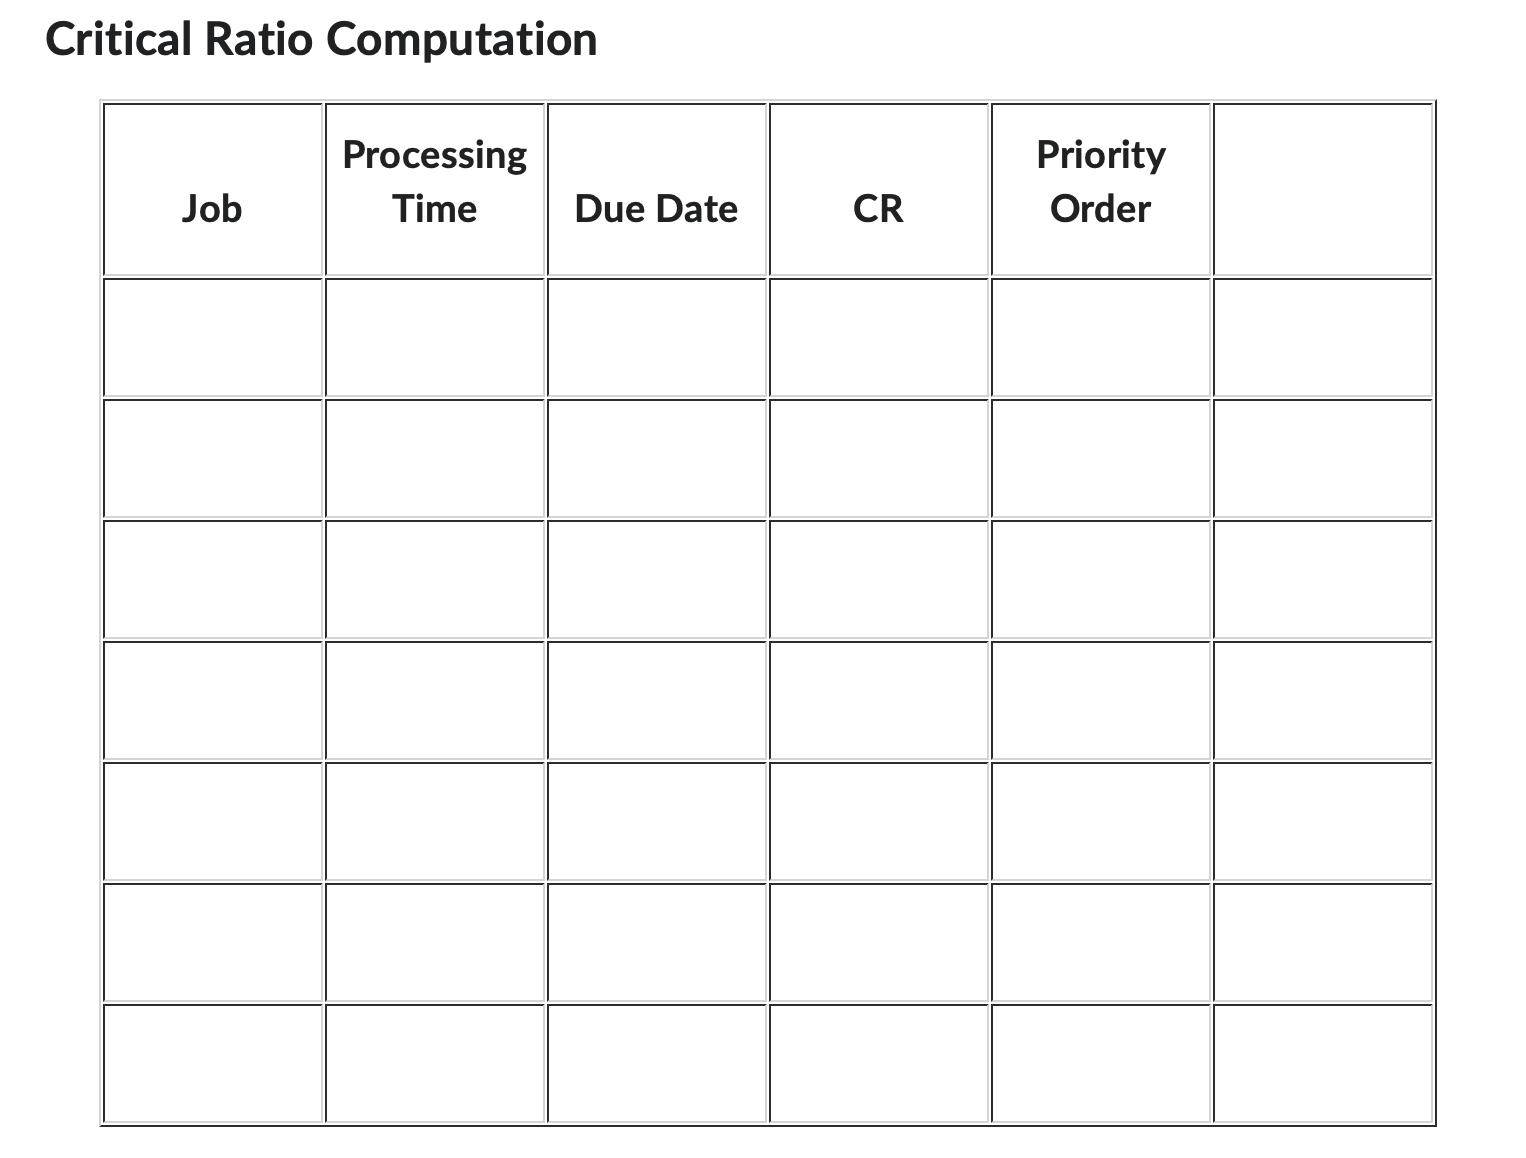 Critical Ratio Computation Job Processing Time Due Date CR Priority Order